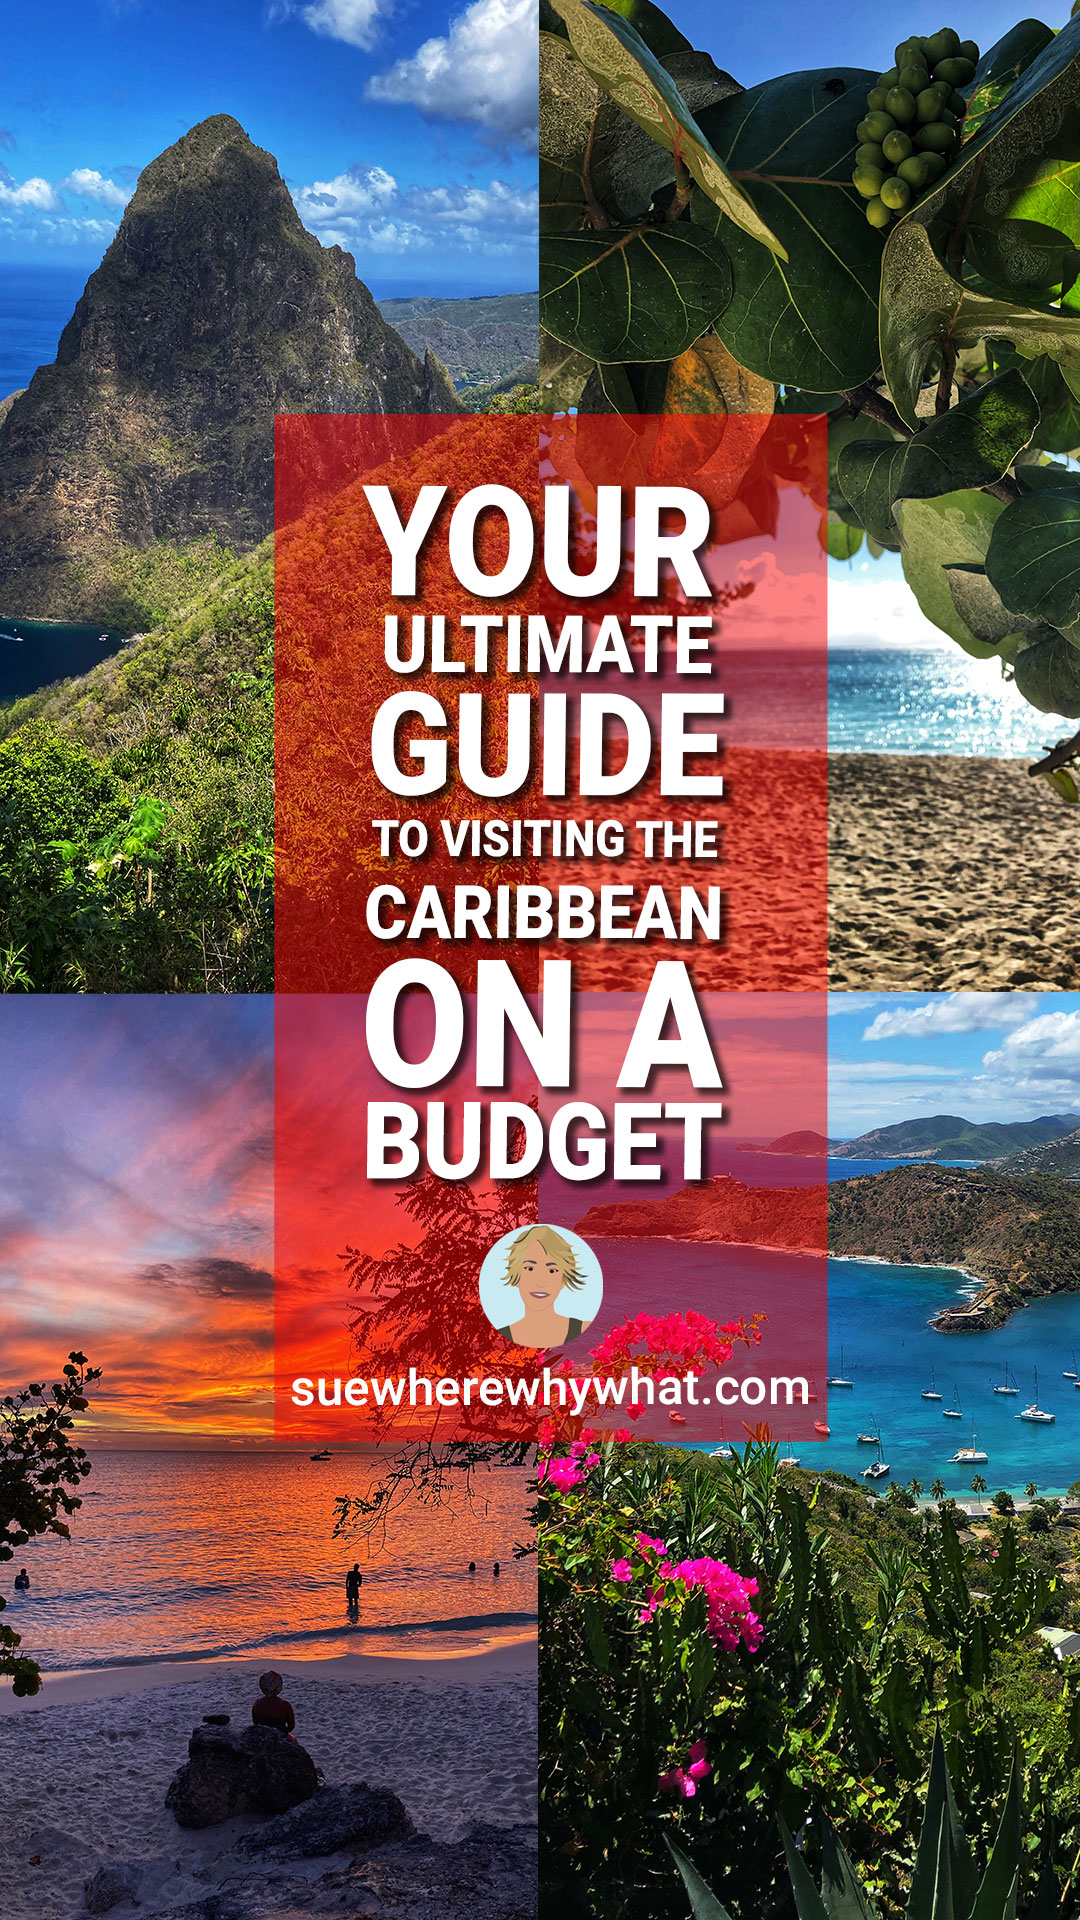 Your Ultimate Guide to Visiting the Caribbean on a Budget